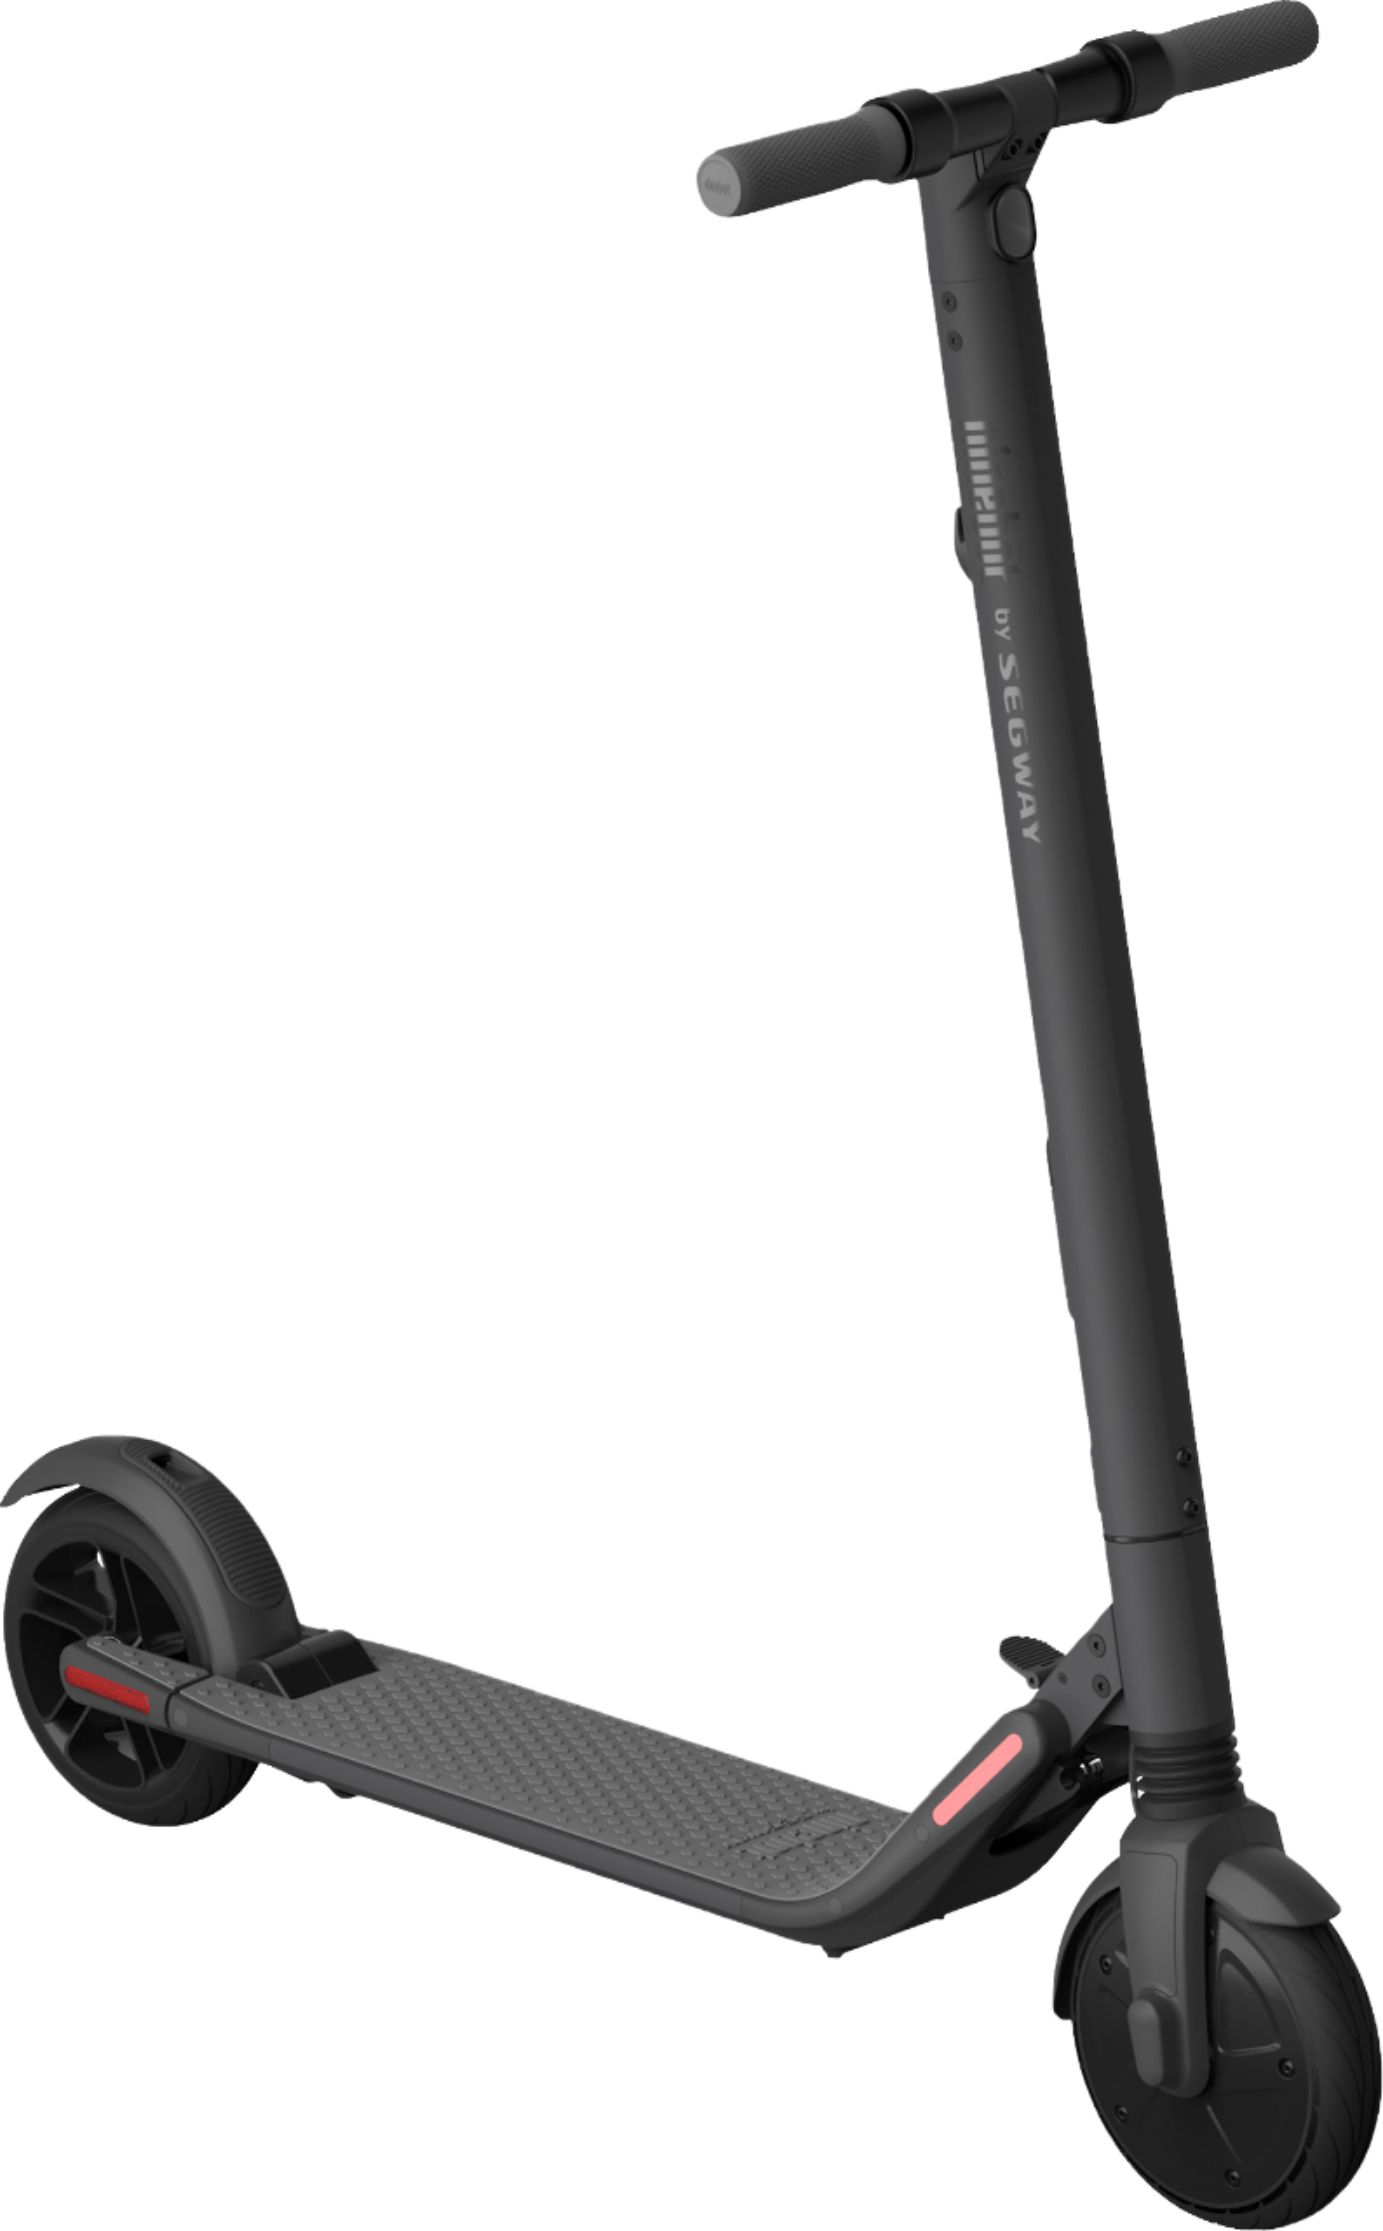 Segway - Ninebot ES2-N Foldable Electric Scooter for $399.99